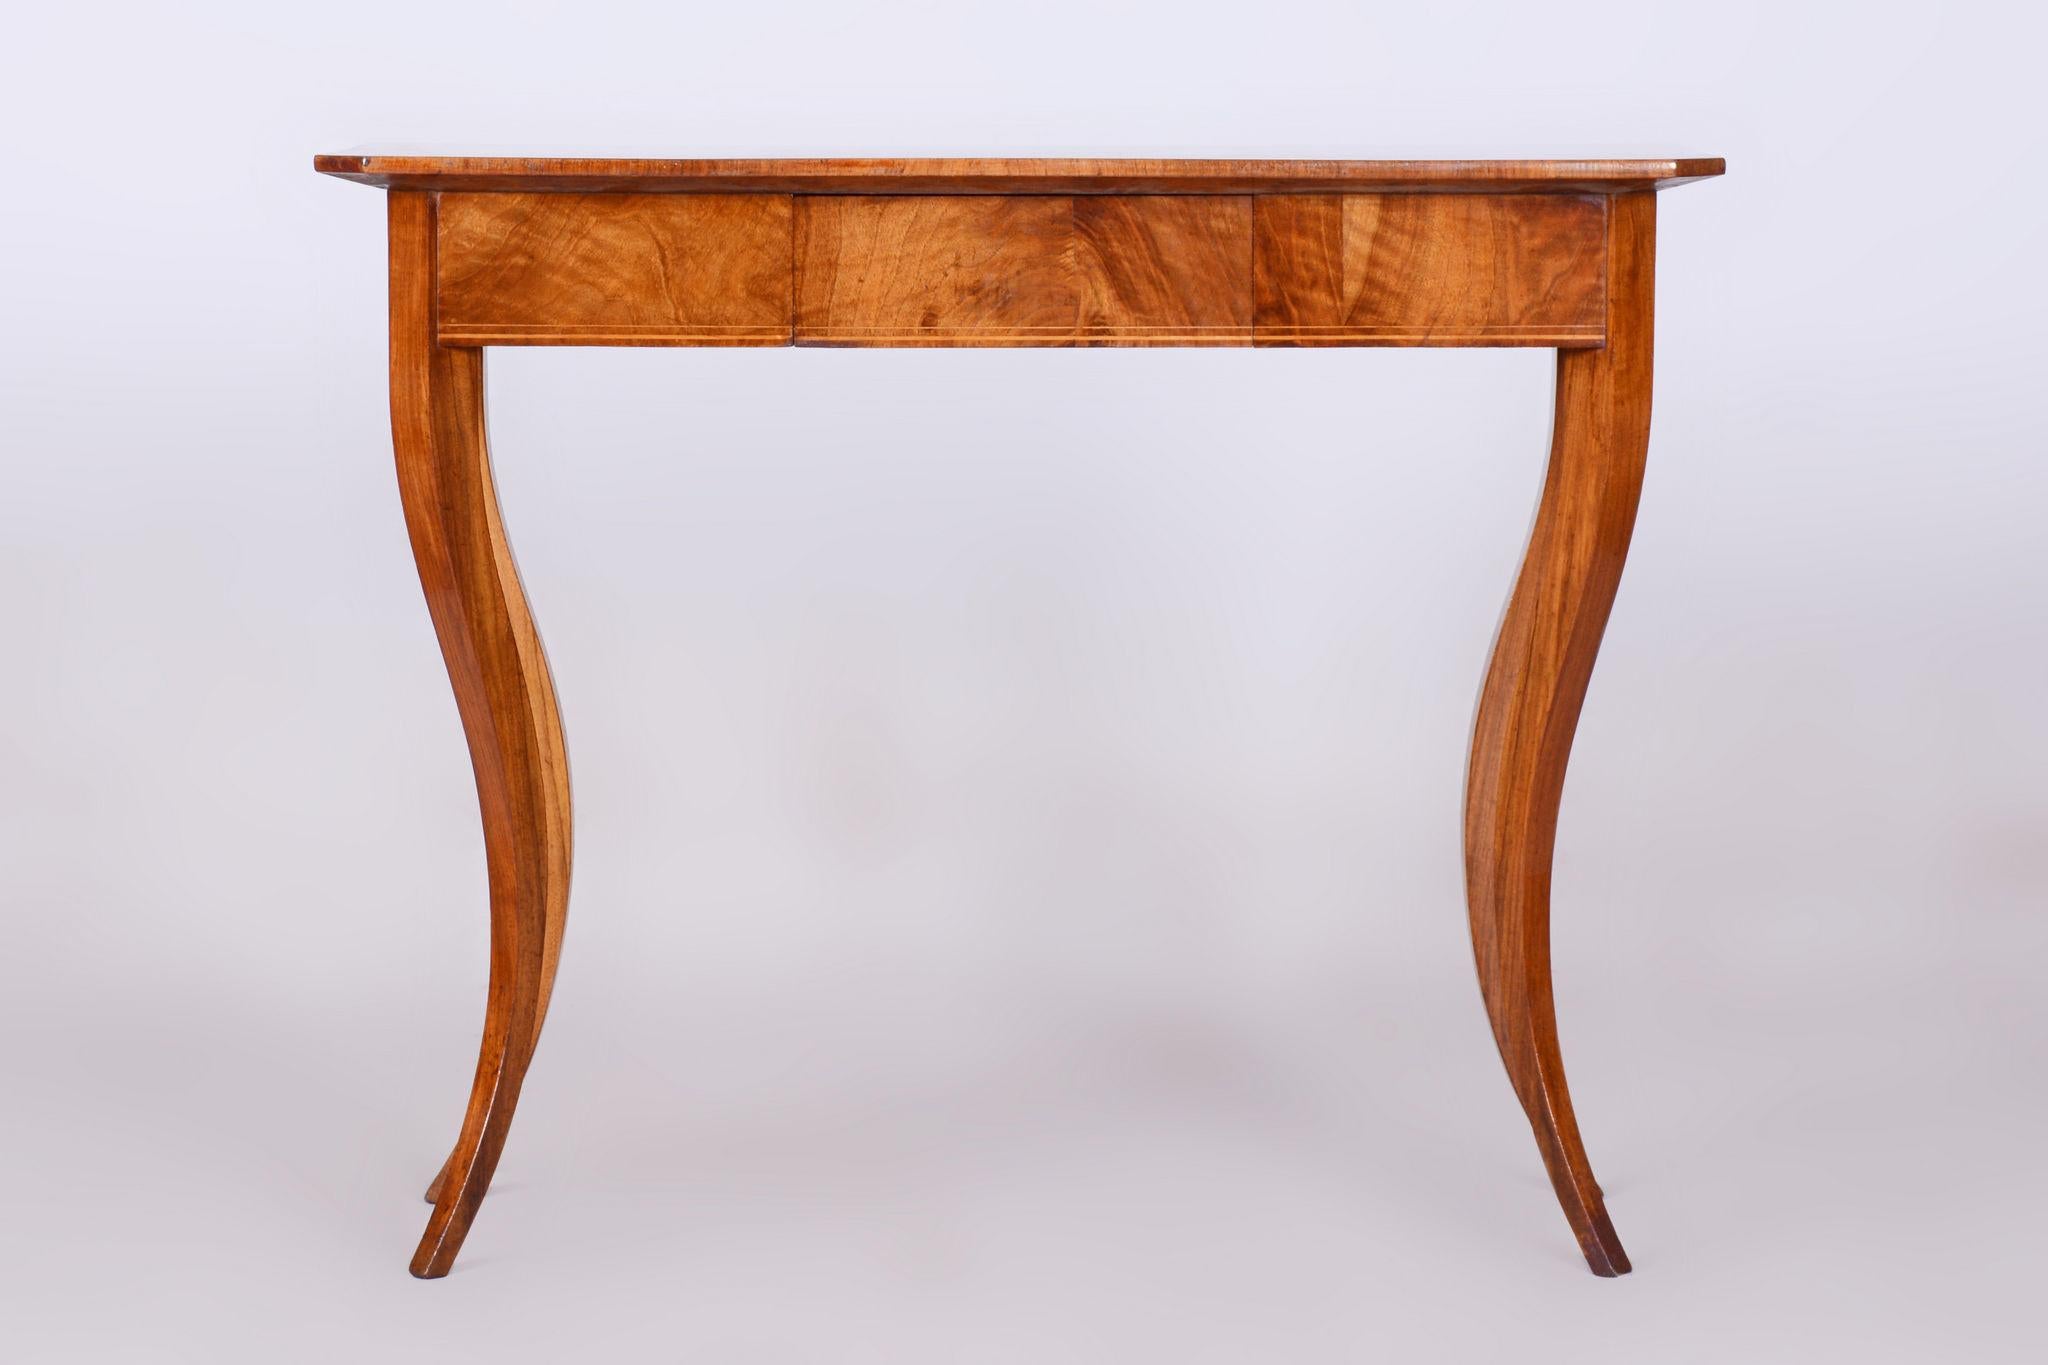 Origin: Austria
Period: 1820-29

This item features classic Biedermeier elements. Visual simplicity, light-colored woods, and contrasting inlays characterize this style. Relaxed sophistication is the name of the game. Despite original Biedermeier